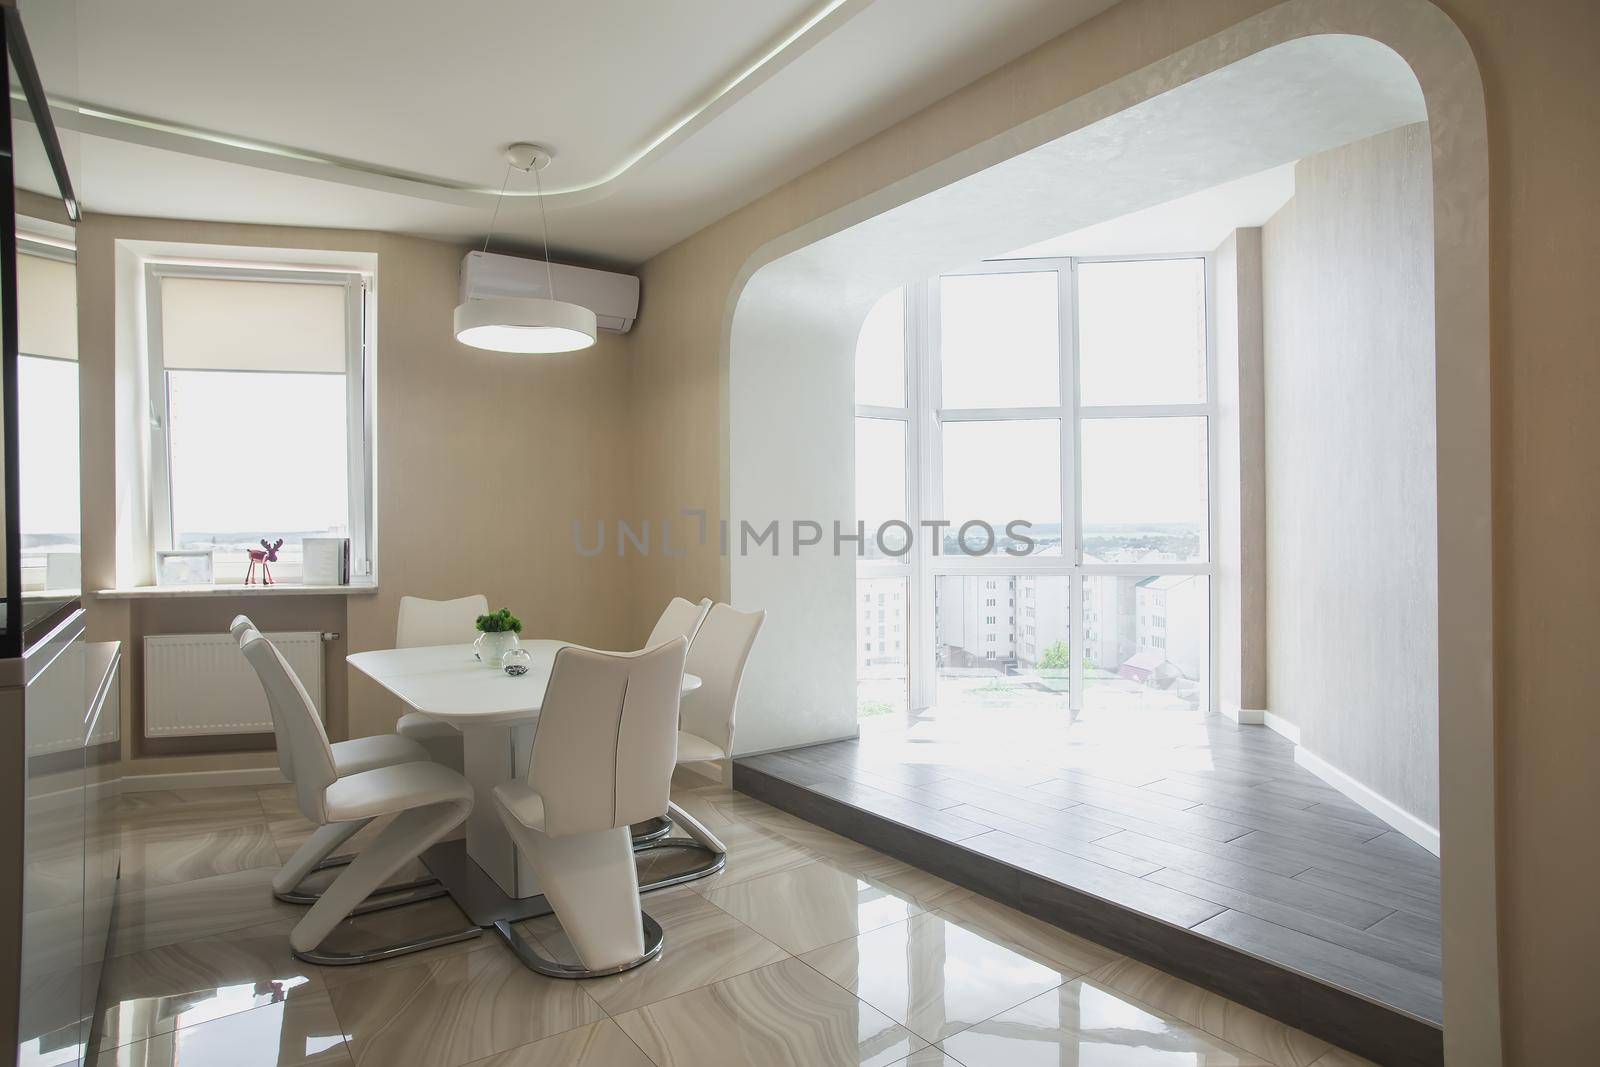 Beautiful modern apartment interier. Real estate concept. Nice real designed interior.